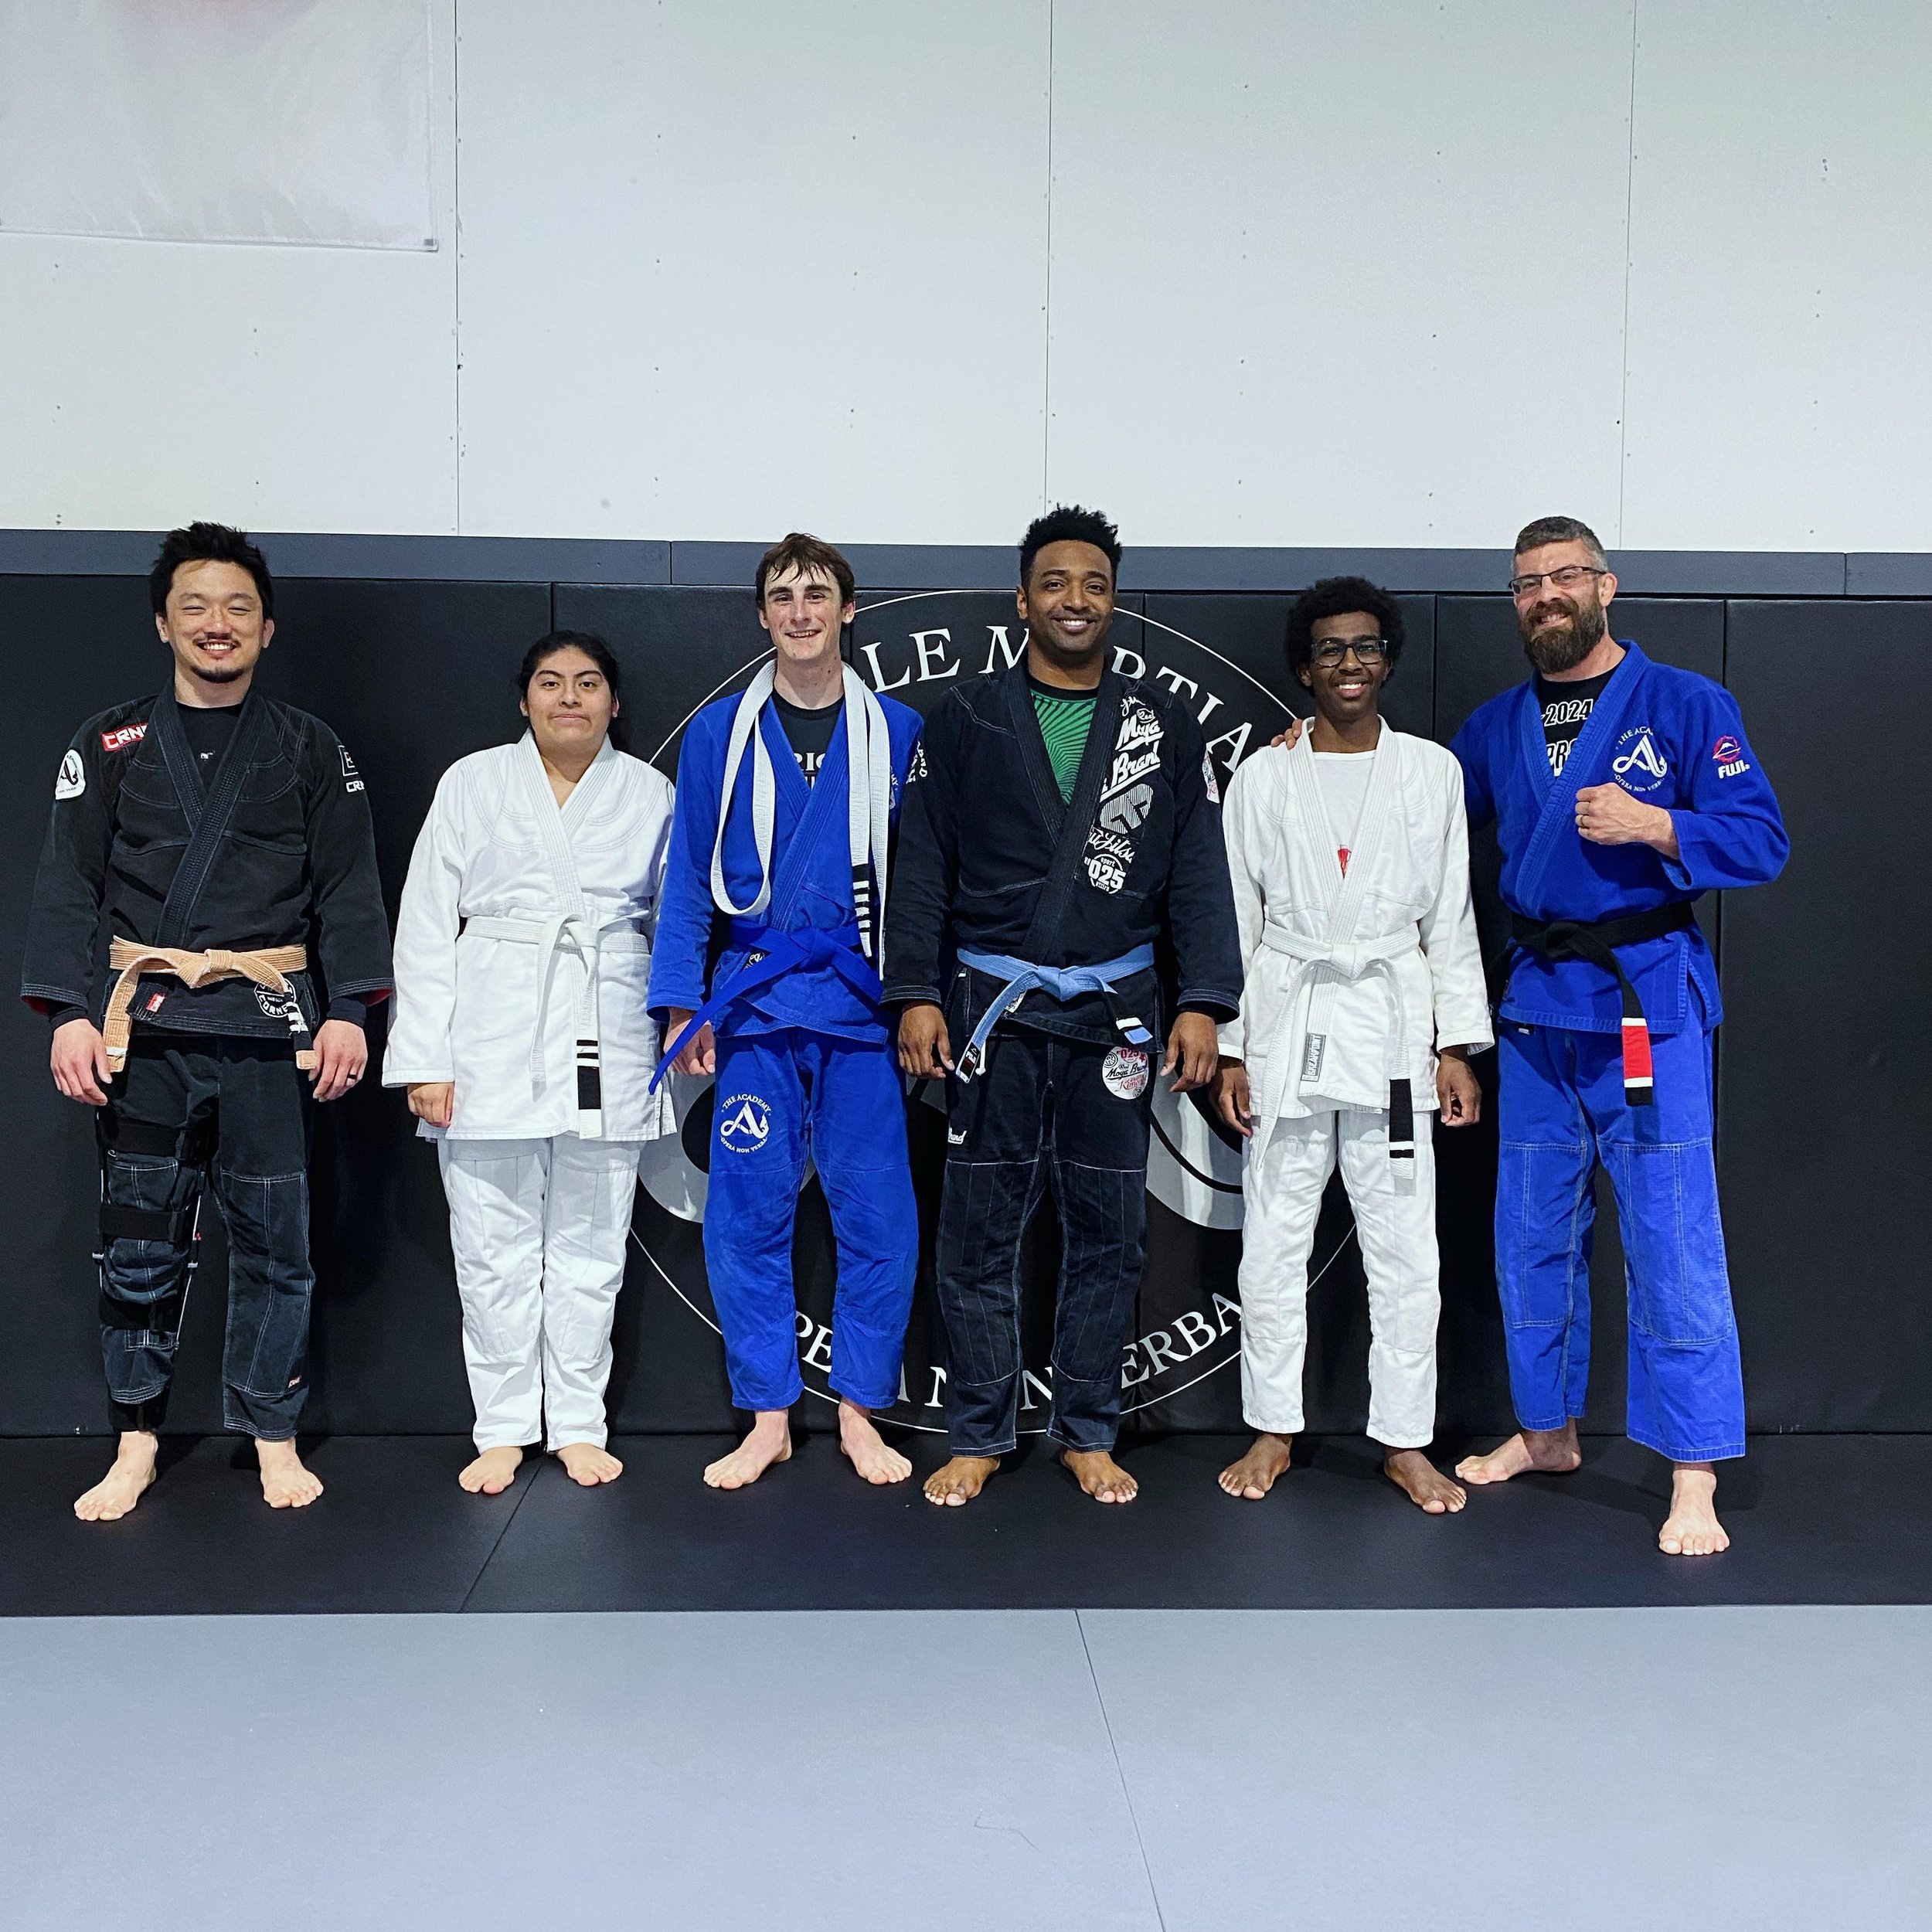 Congratulations to these four for moving up tonight!
Jonas earned his blue belt and Herb, Hannah and Abdi all earned stripes. 🥋
.
.
.
.
#bluebelt #bjj #newstripe #jiujitsu #bjjlifestyle #promotion #rankup #hardworkpaysoff #teamacademy #operanonverba